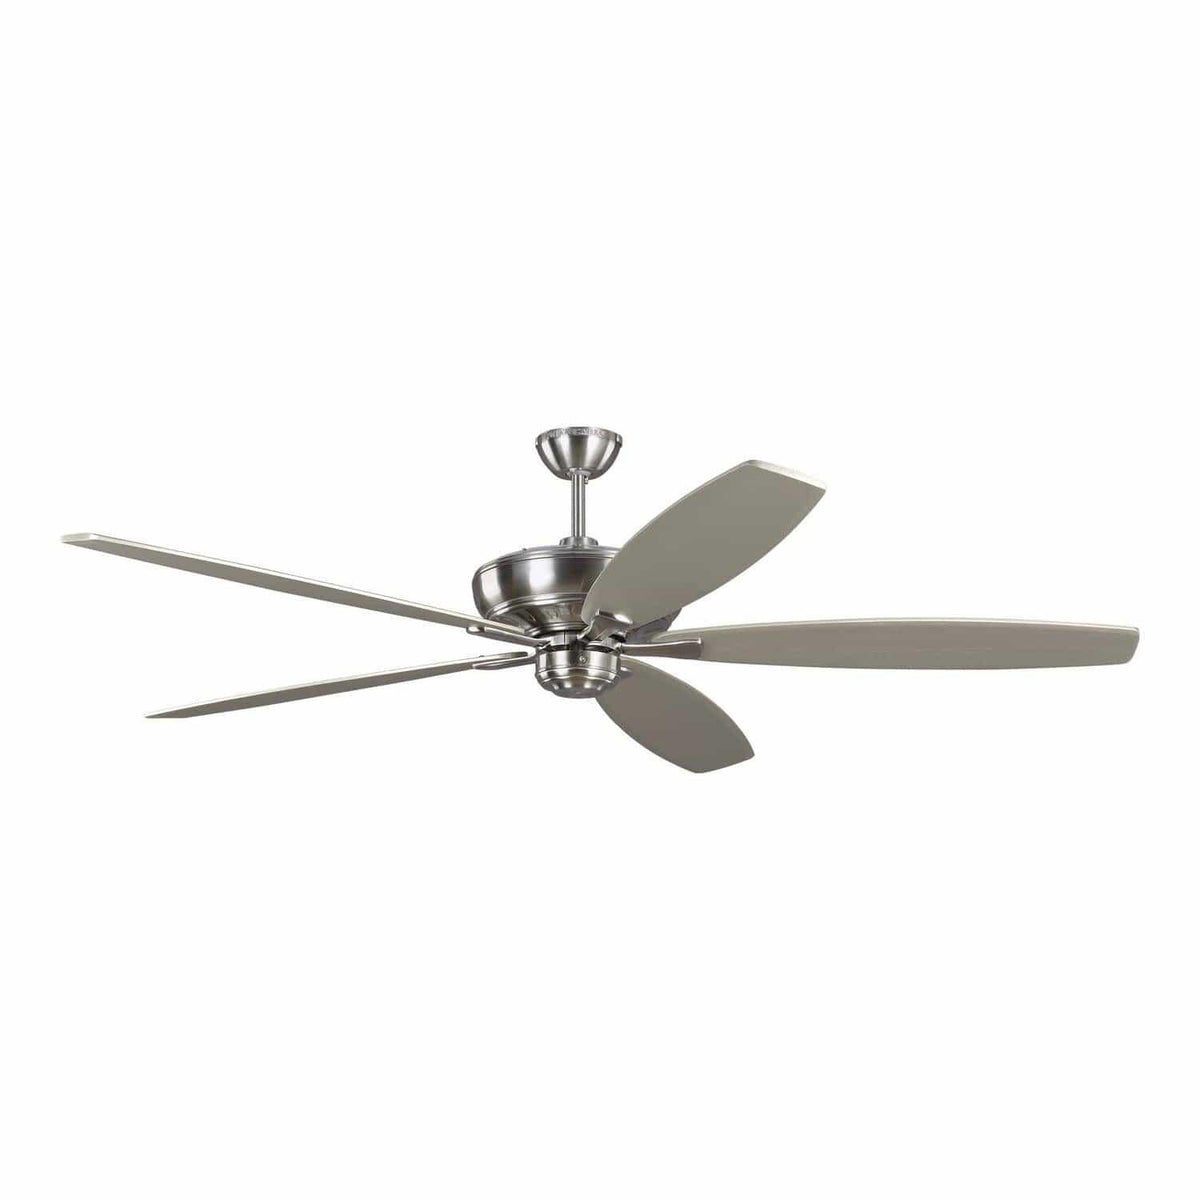 Visual Comfort Fan Collection - Dover Ceiling Fan - 5DVR68BS | Montreal Lighting & Hardware